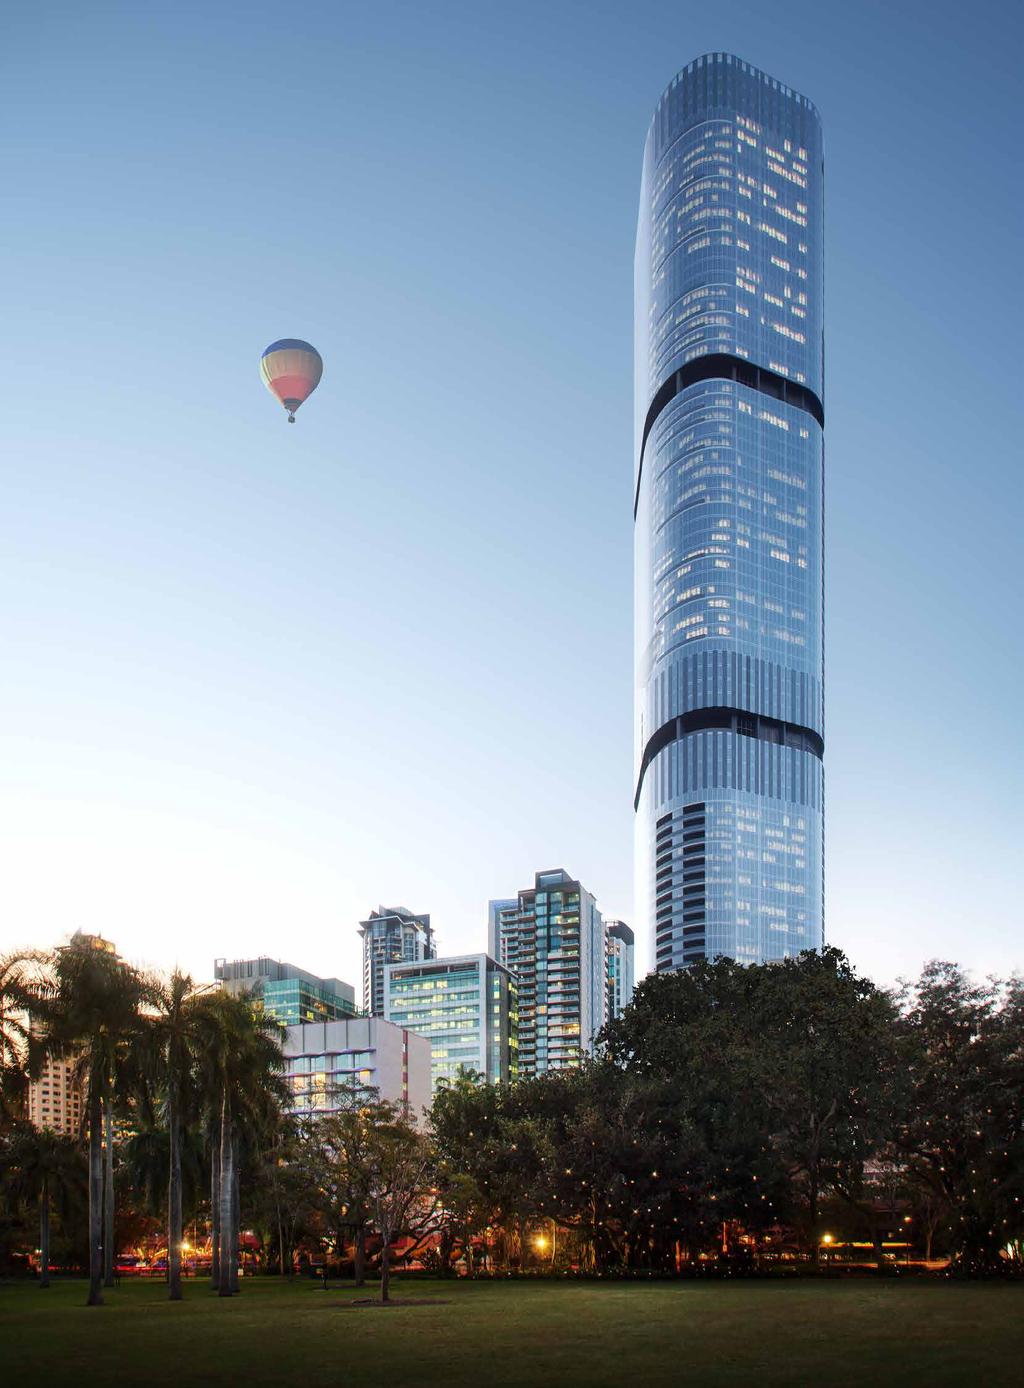 ARCHITECTURAL GR ANDEUR AMIDST NATUR AL SPLENDOUR. A vision of elegance, Brisbane Skytower is a beautiful piece of architecture set in a truly magnificent setting.